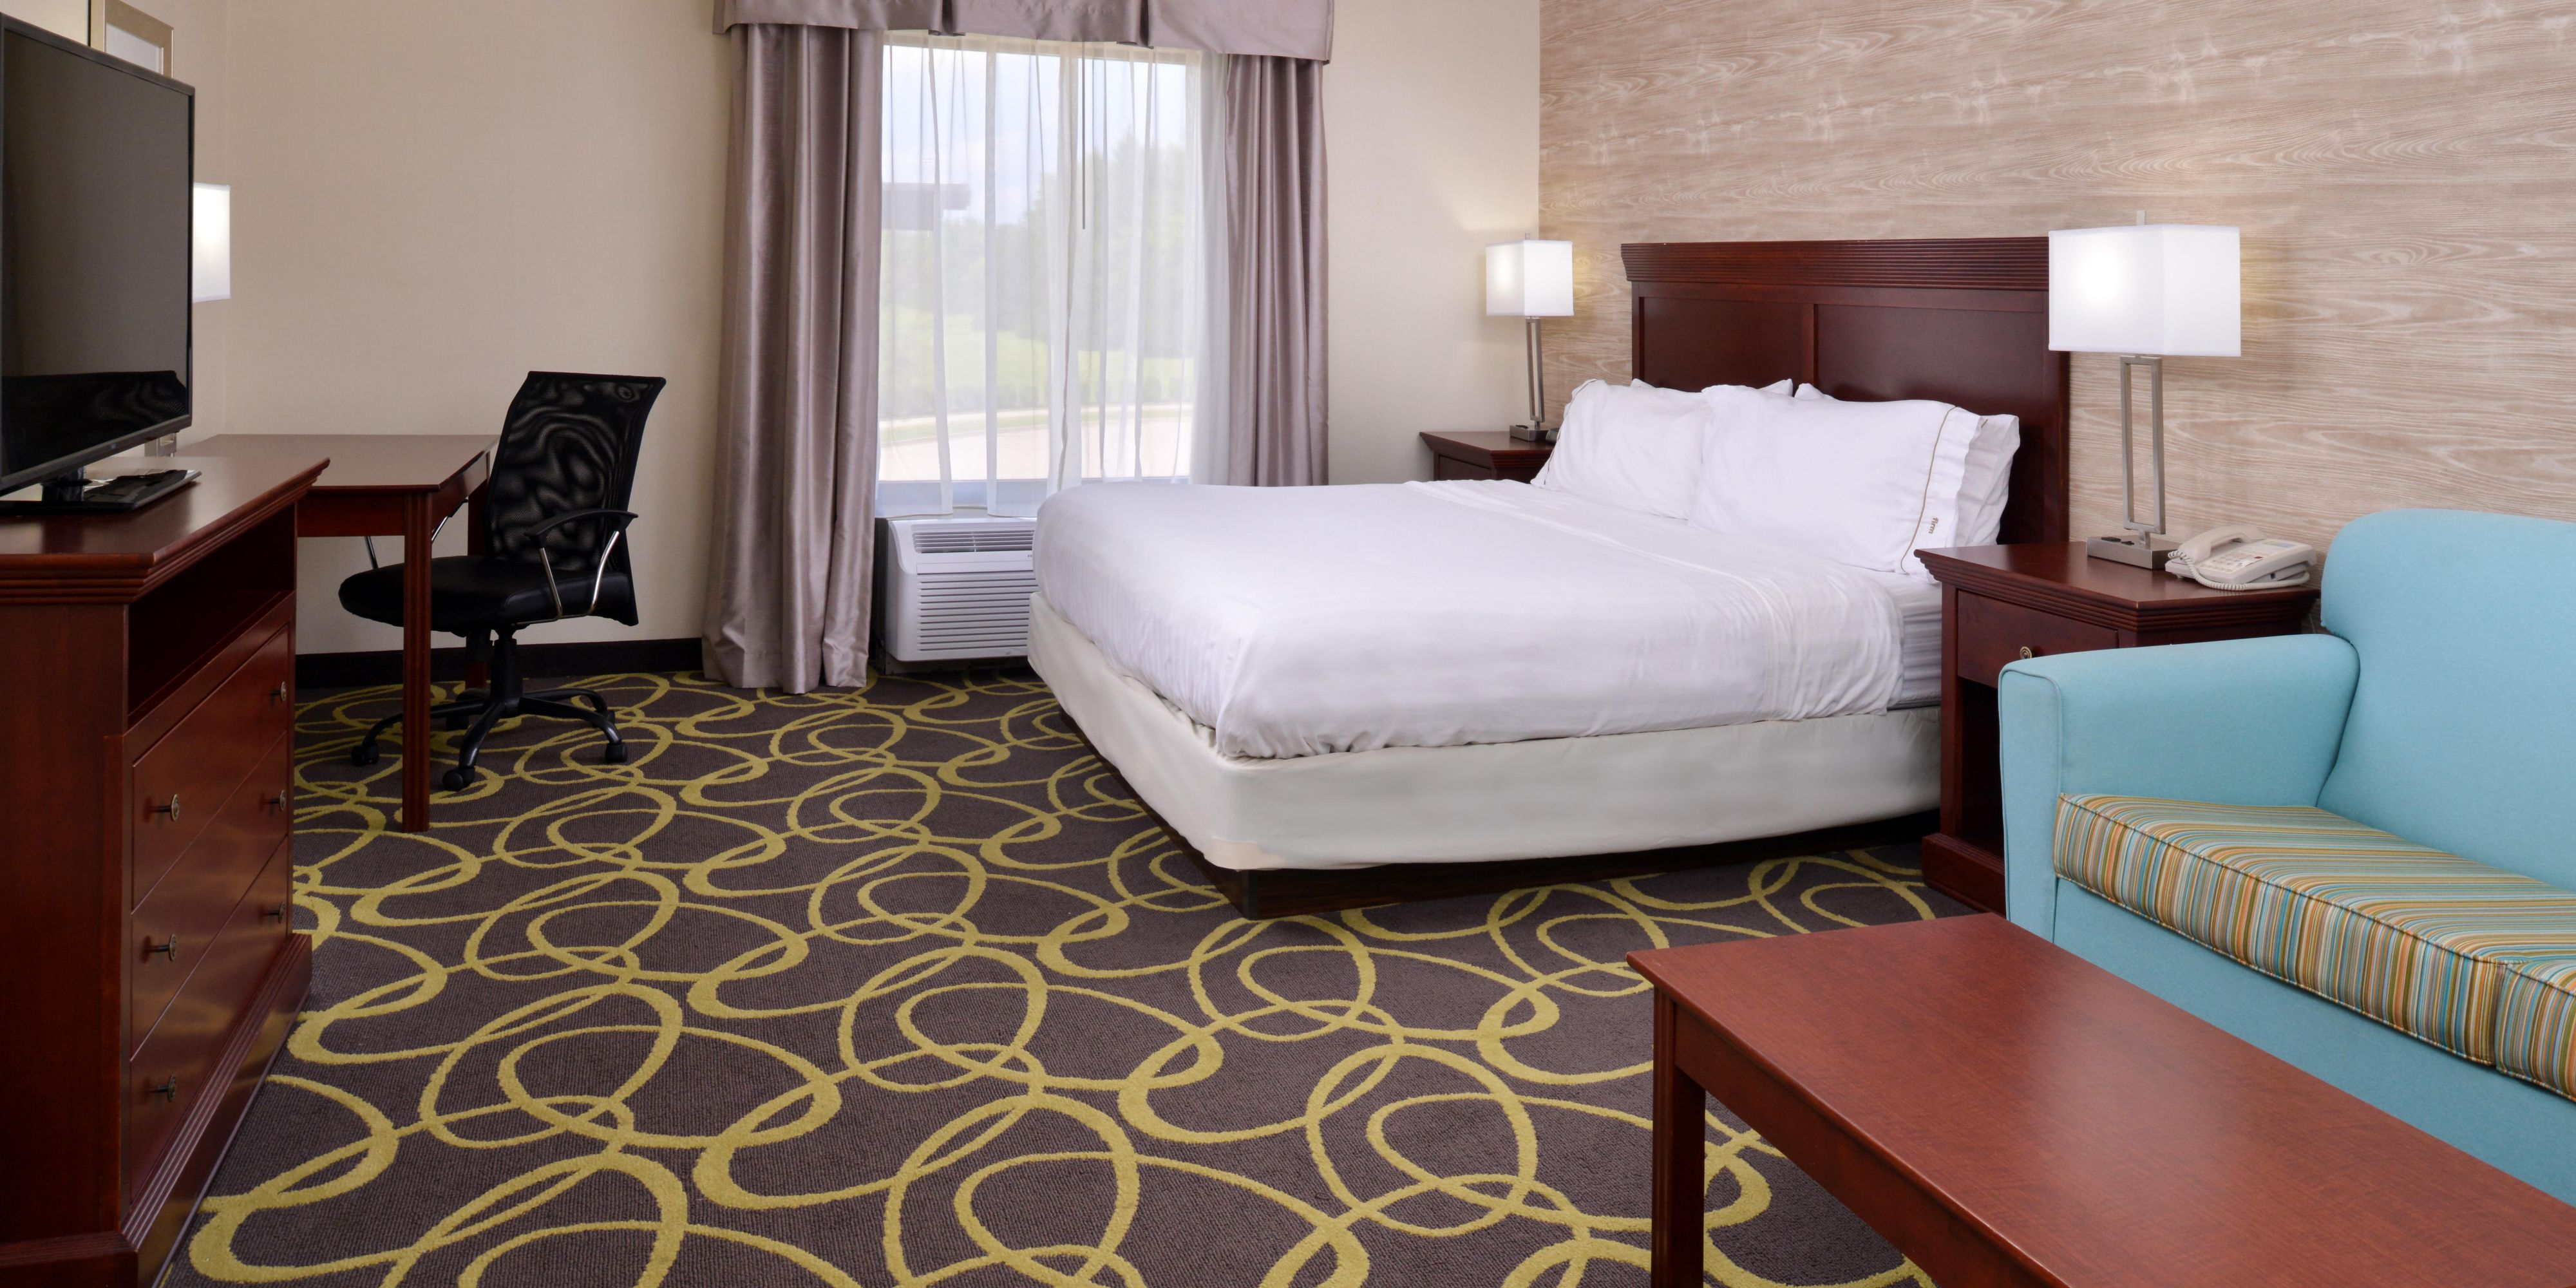 Check out our new guest rooms and lobby!